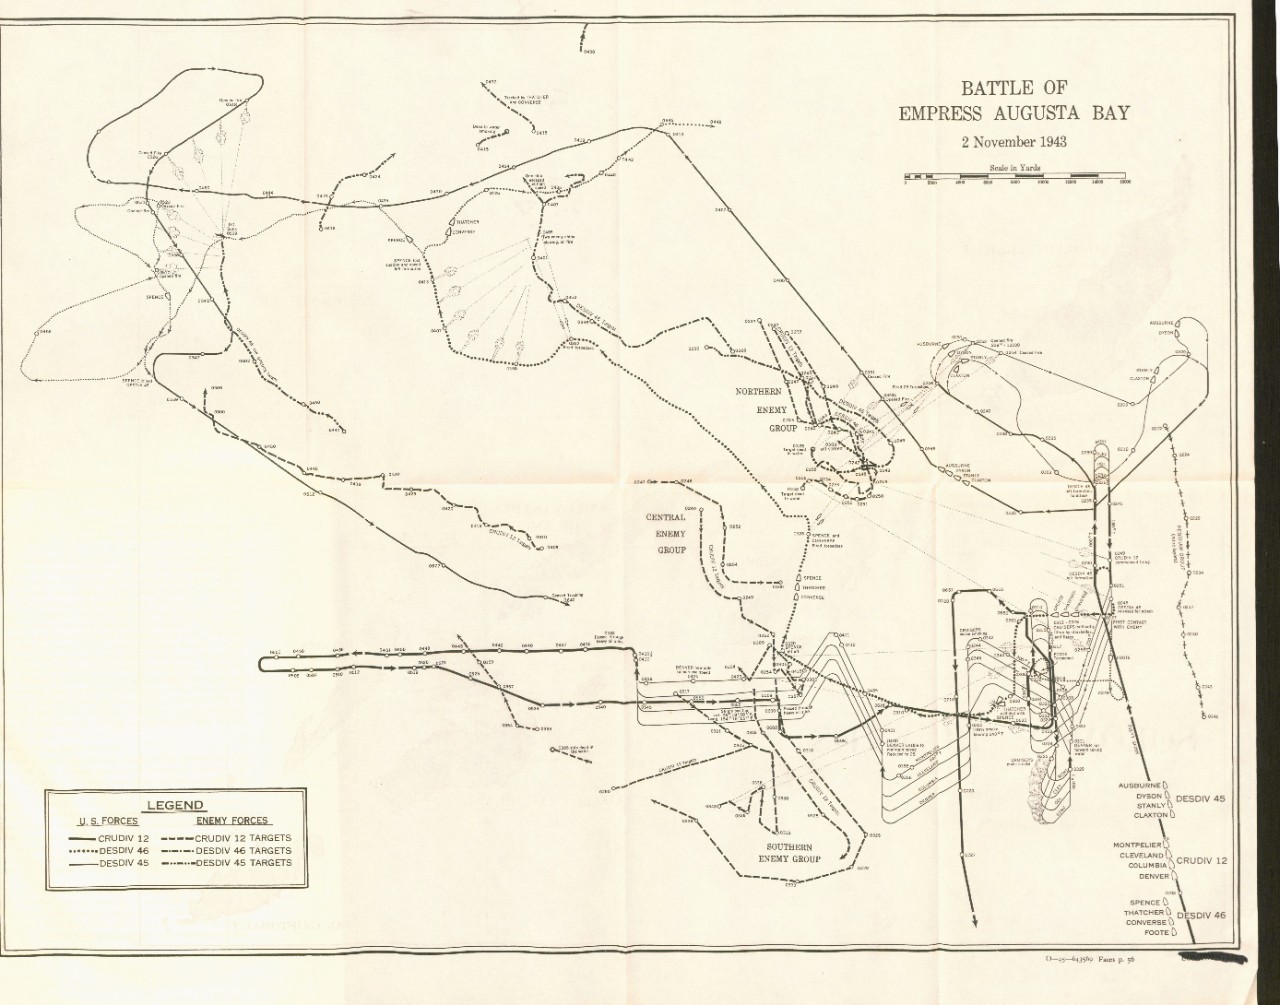 Map of the Battle of Empress August Bay